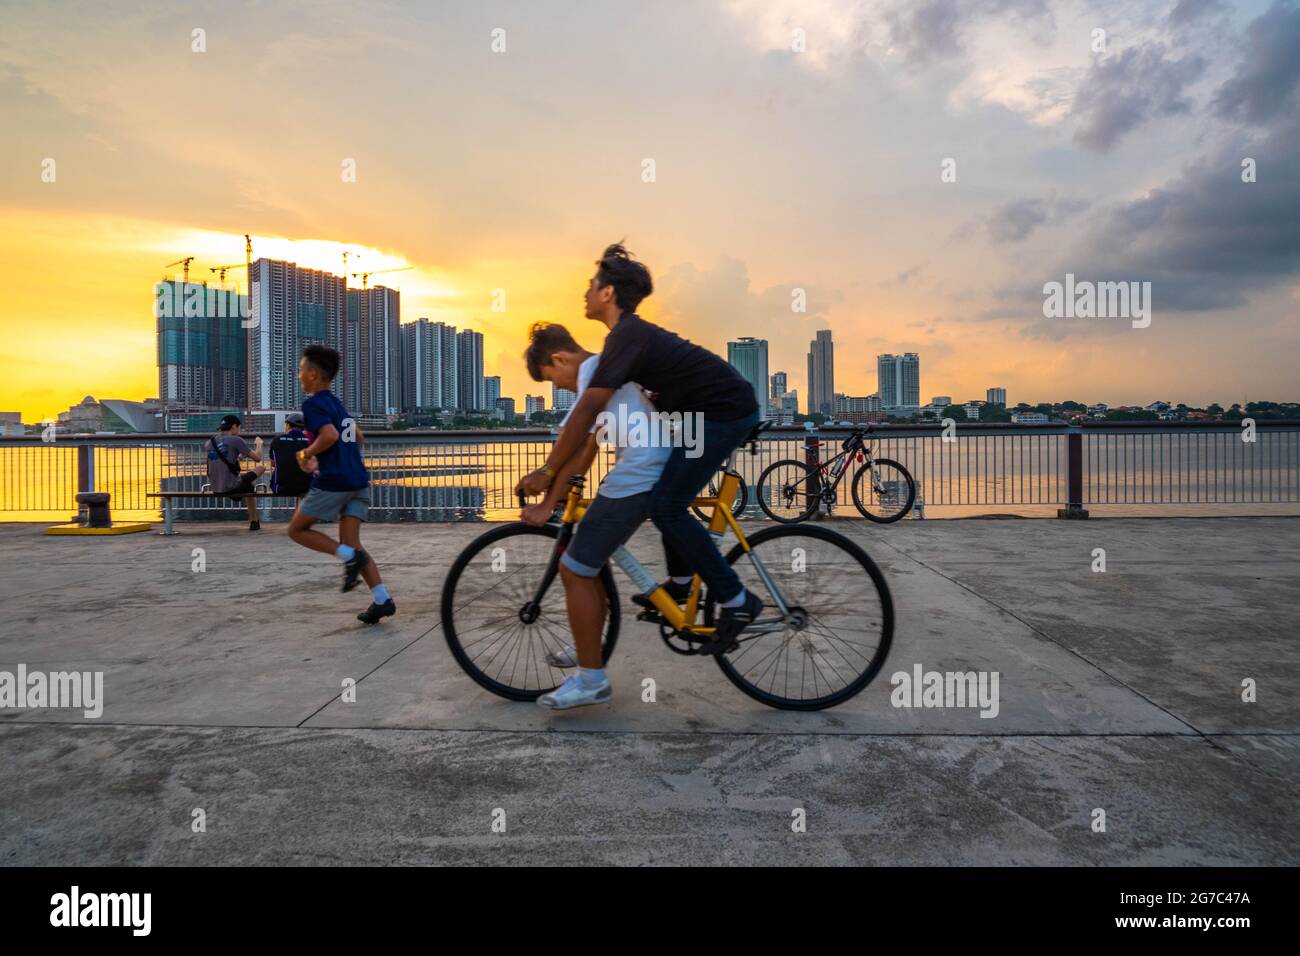 Woodlands Waterfront Park, a coastal park in central Singapore. Stock Photo